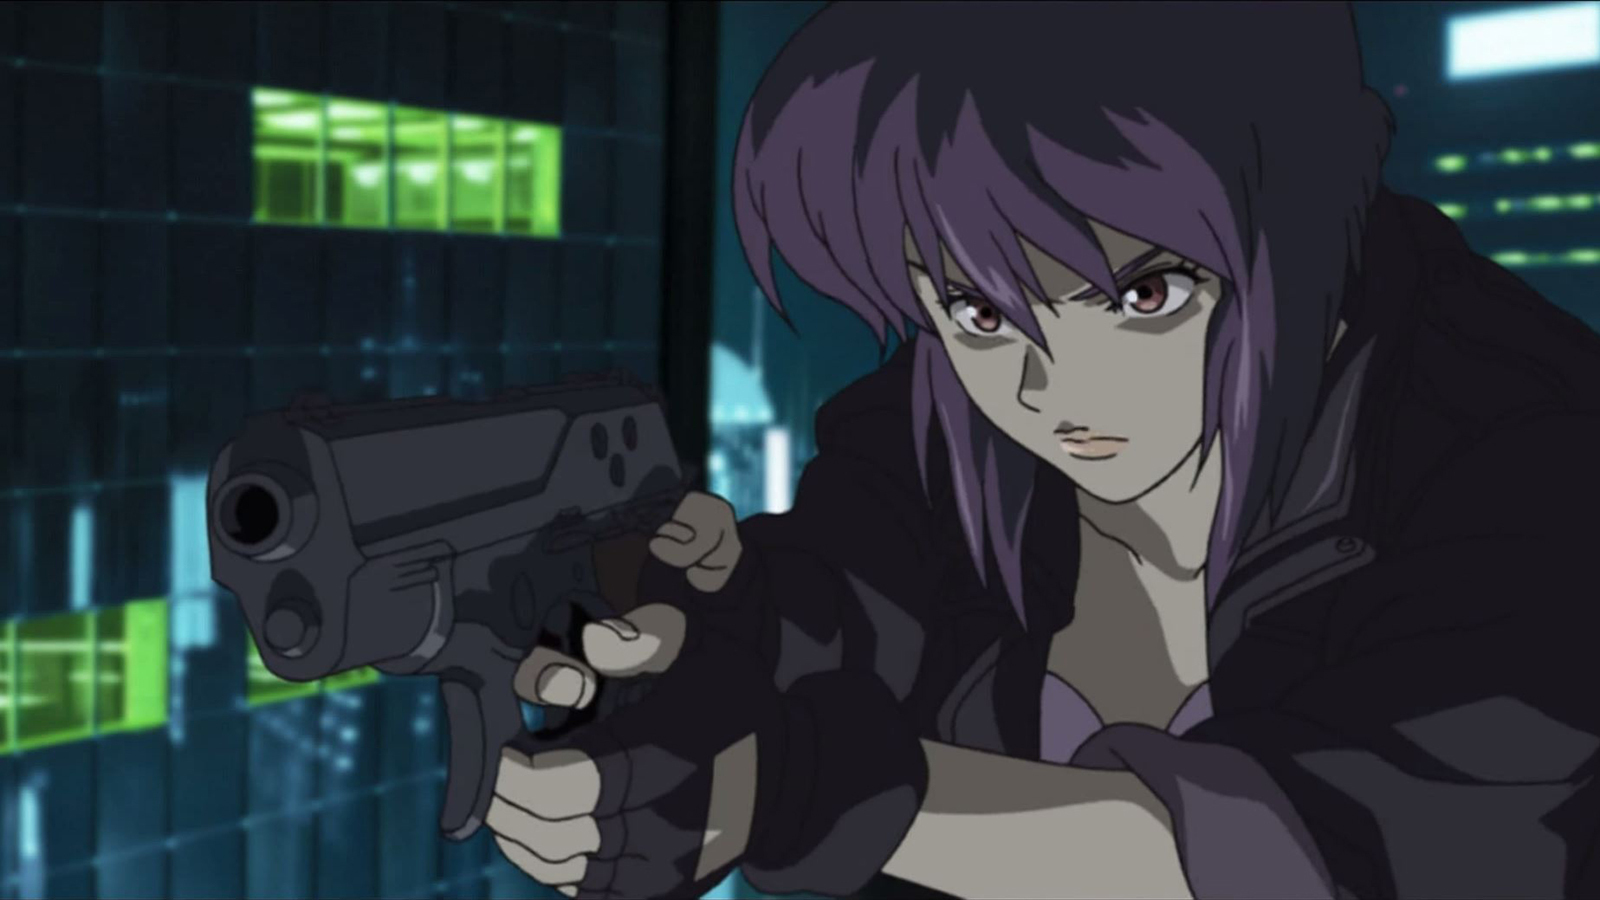 4) Ghost in the Shell: Stand Alone Complex